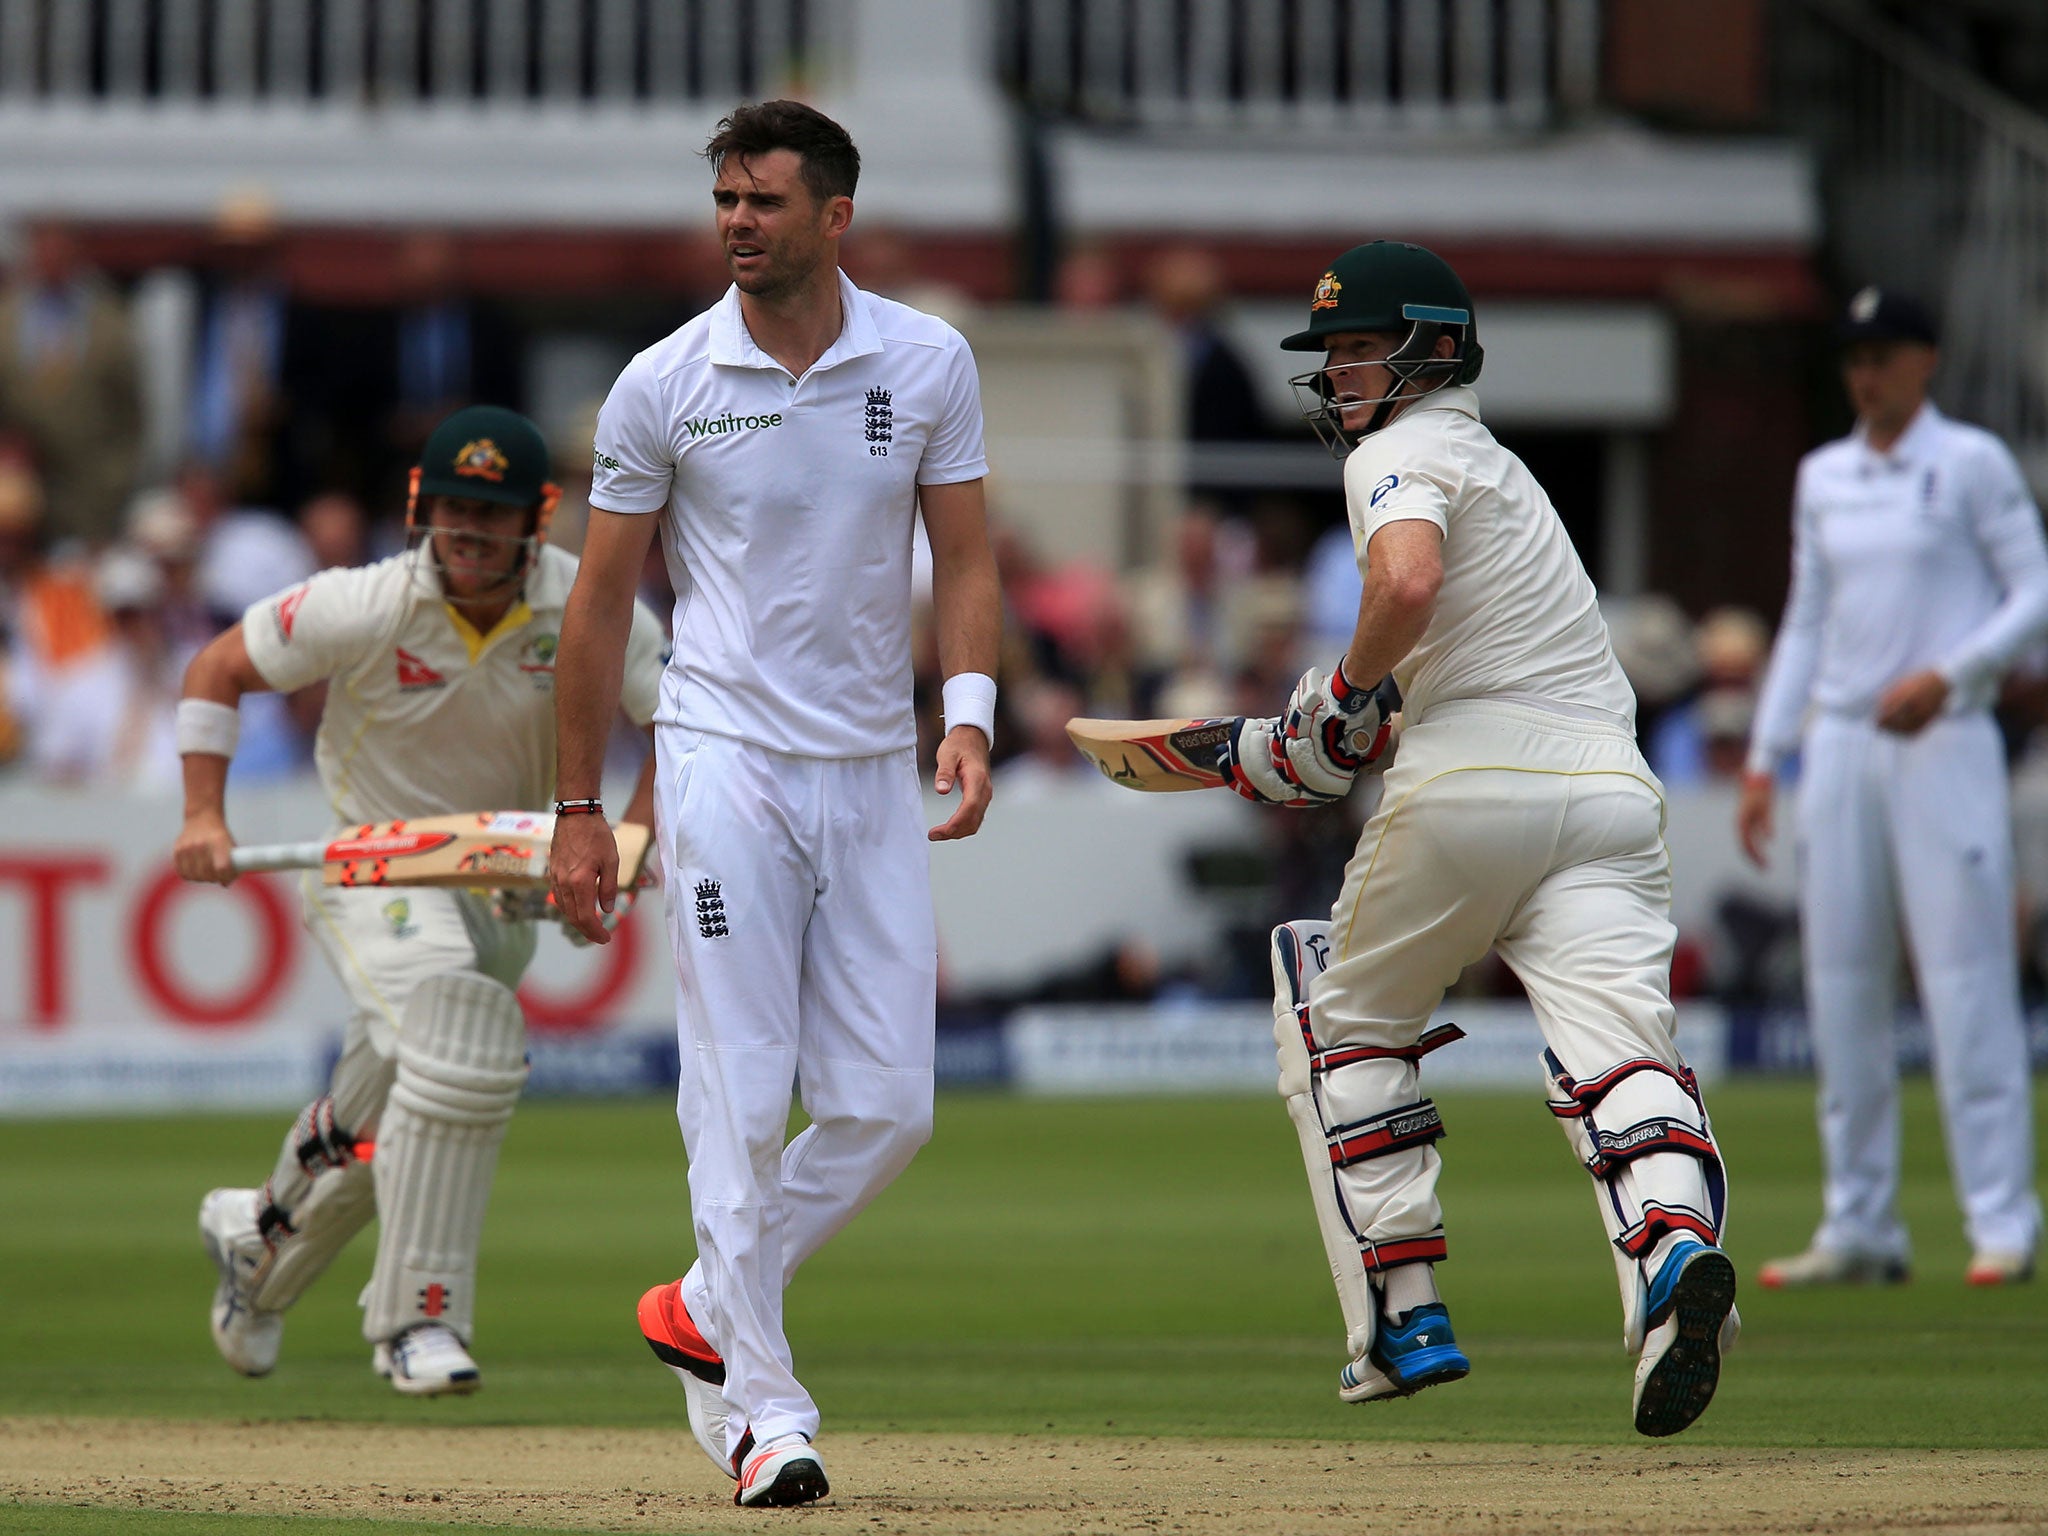 Jimmy Anderson cuts a frustrated figure as Australia pile on the runs